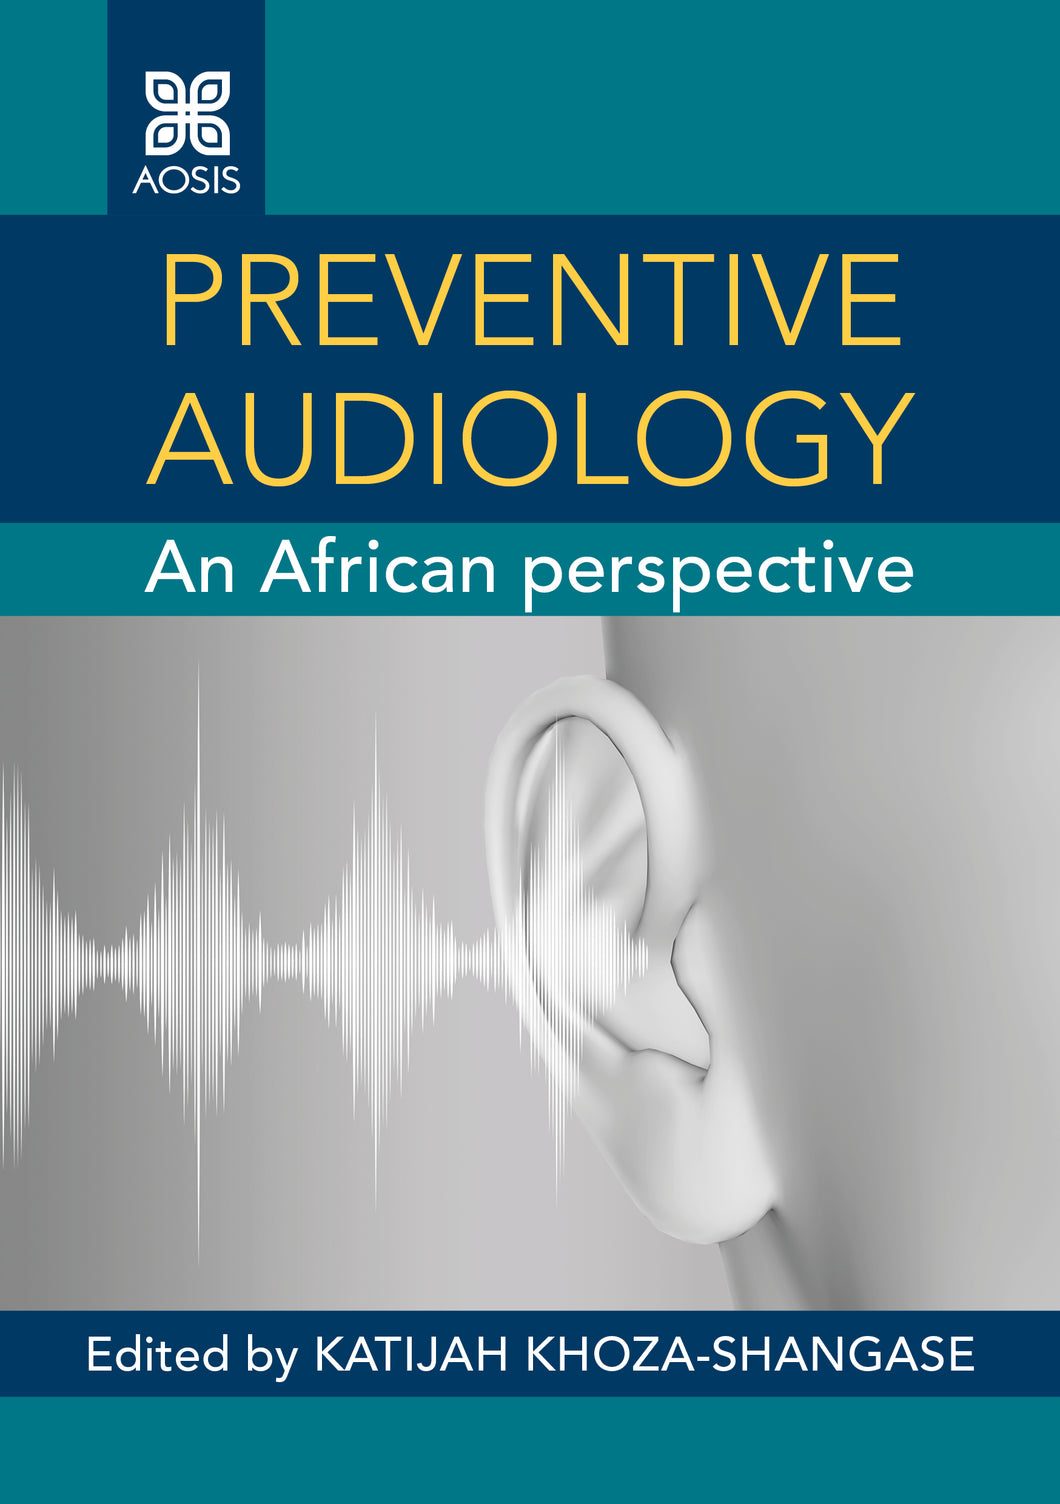 Preventive audiology: An African perspective